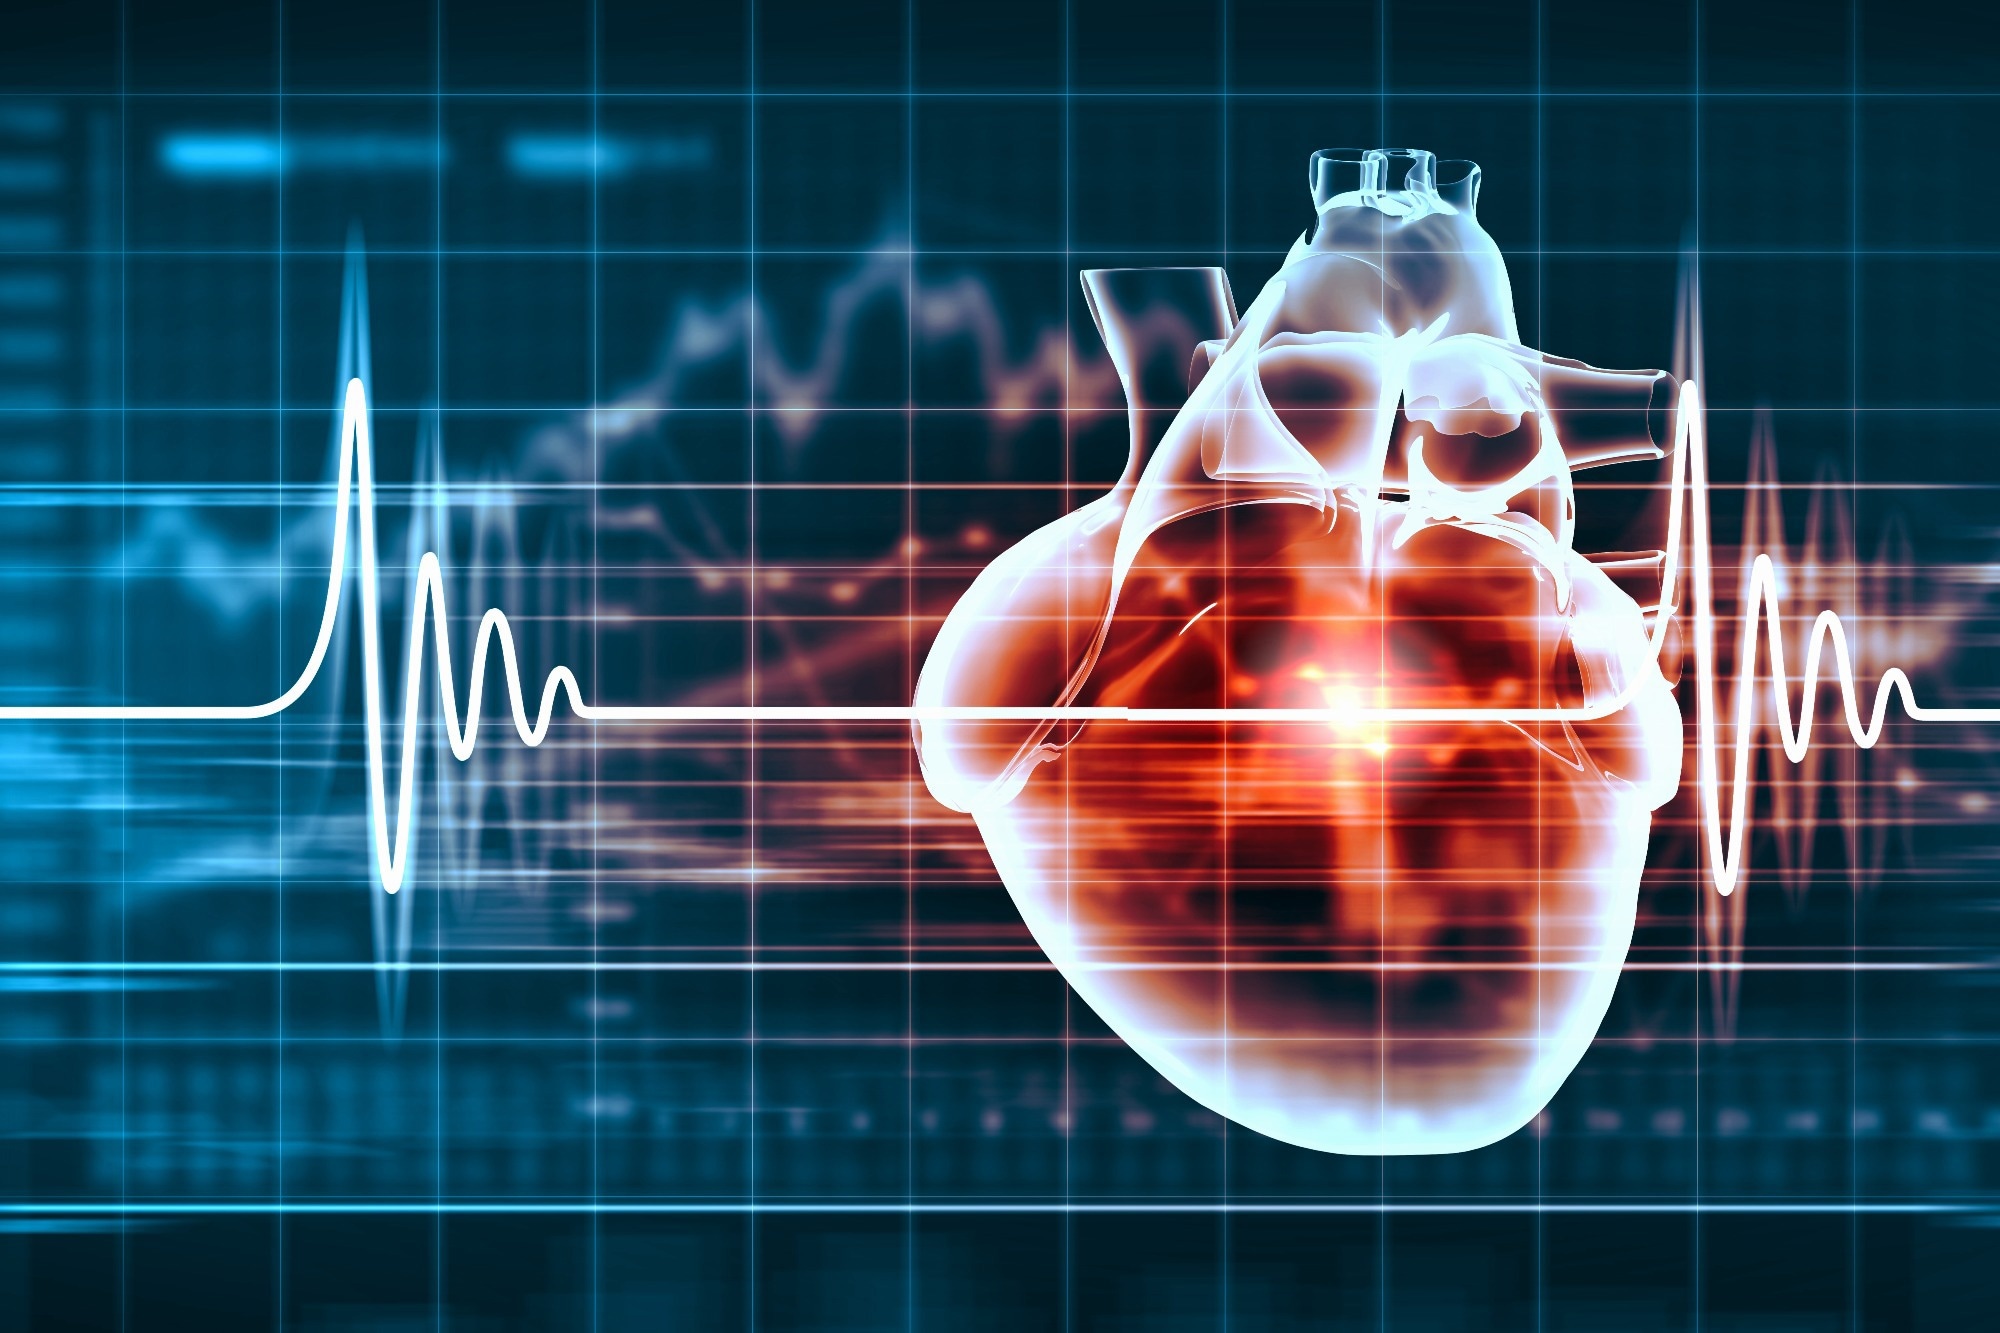 Cardiovascular disease and cancer: shared risk factors and mechanisms. Image Credit: ESB Professional / Shutterstock